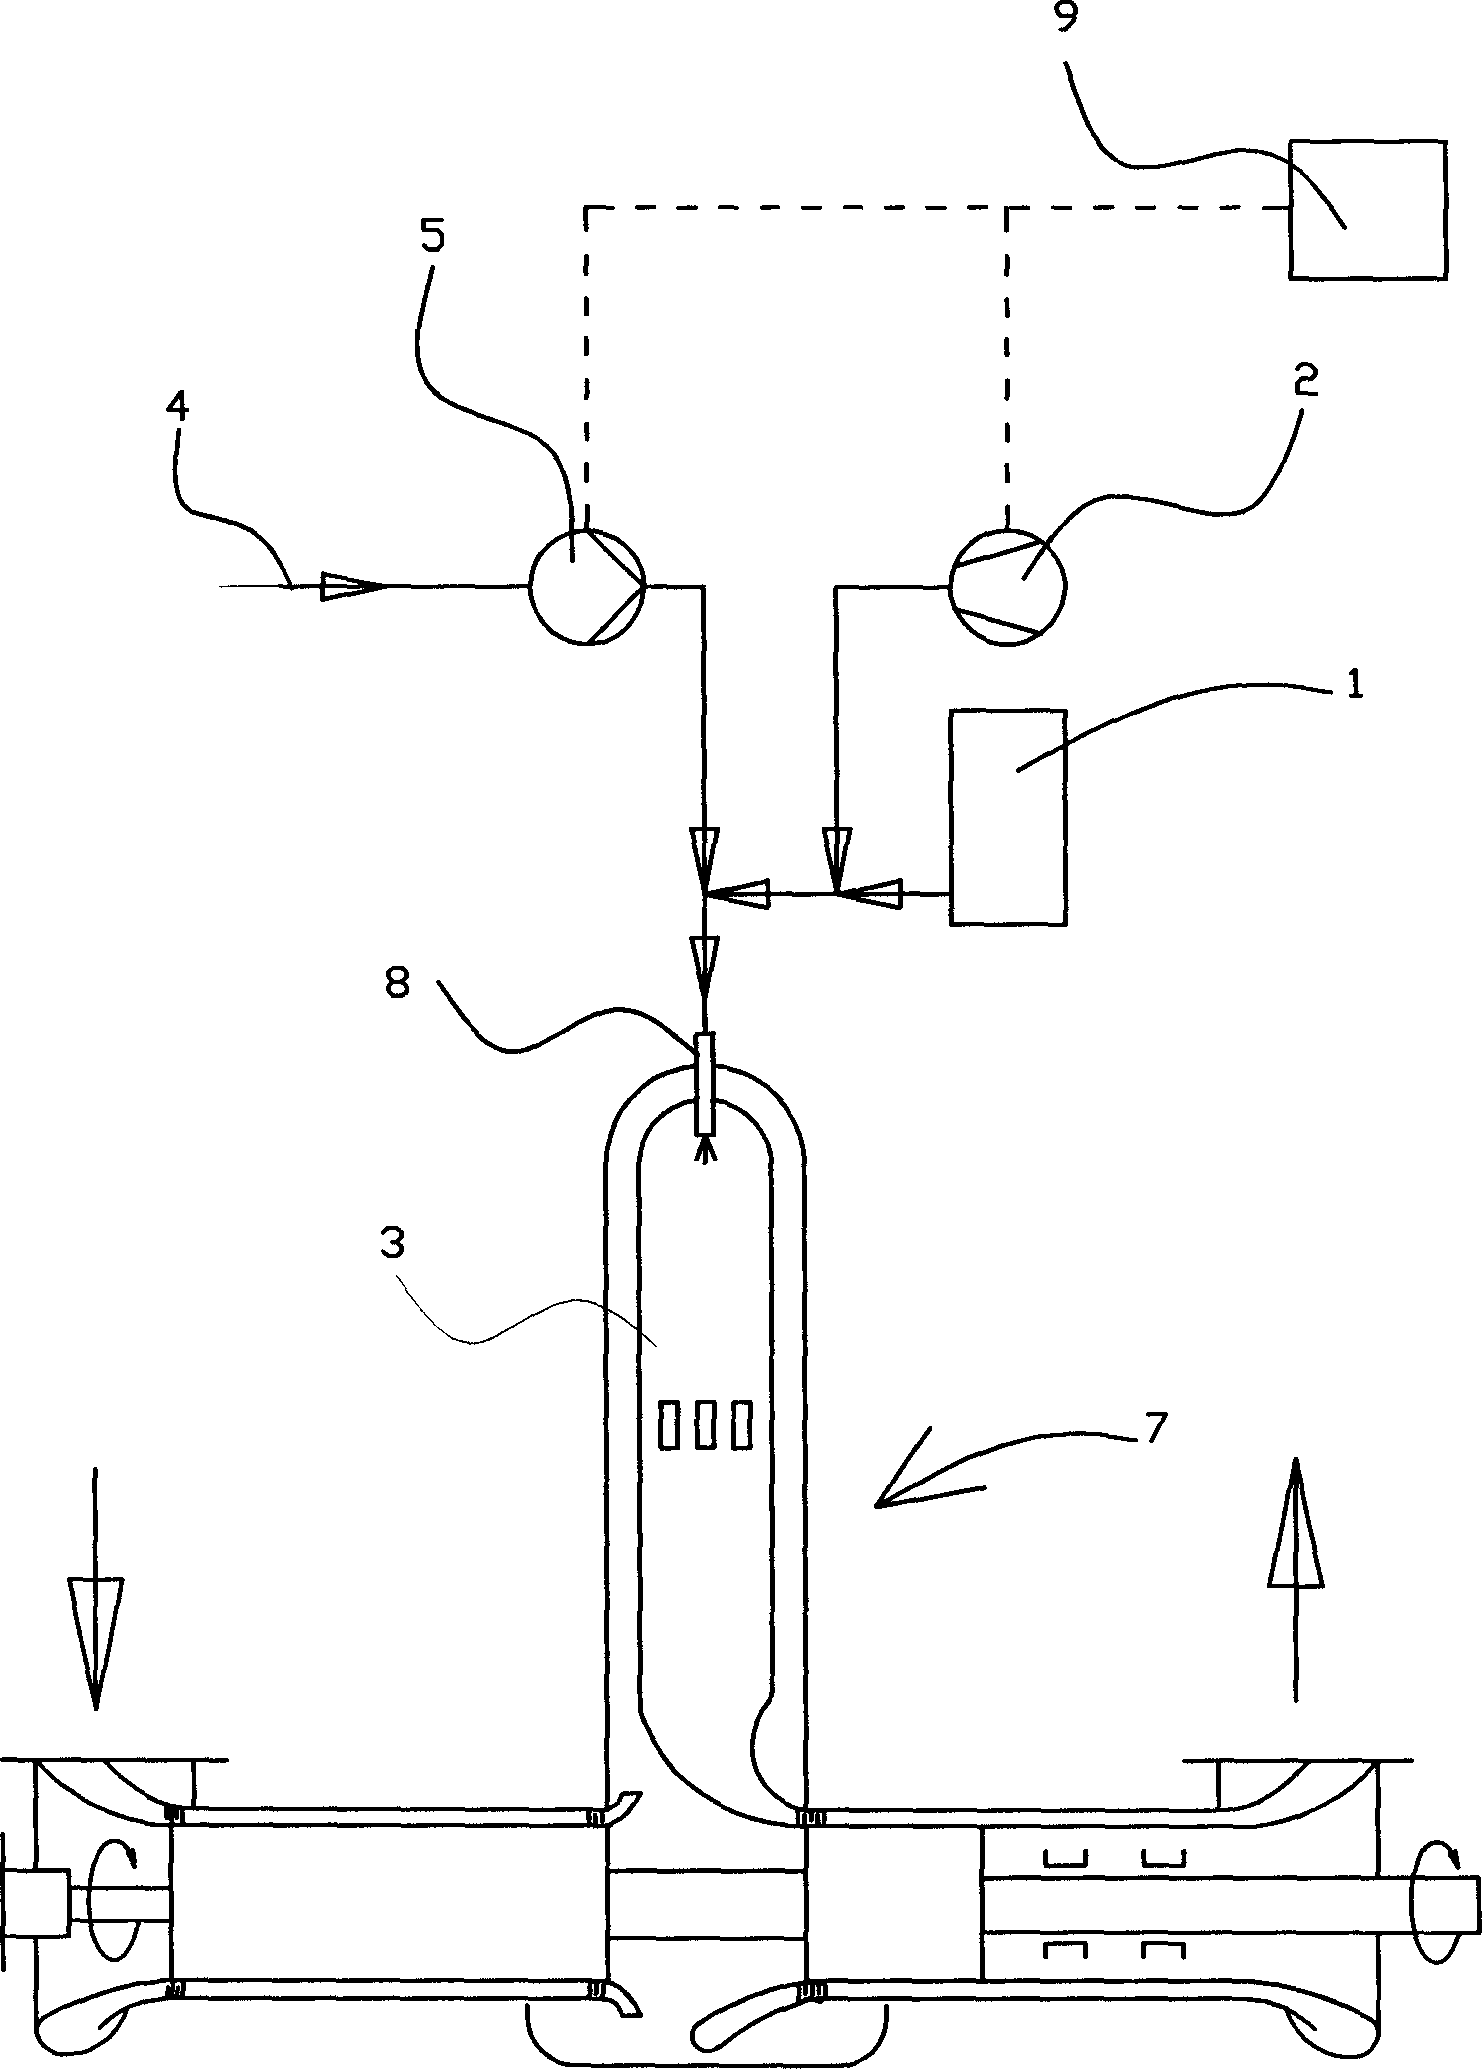 Energy saver assistant with water combustion for combustion tool or gas power set